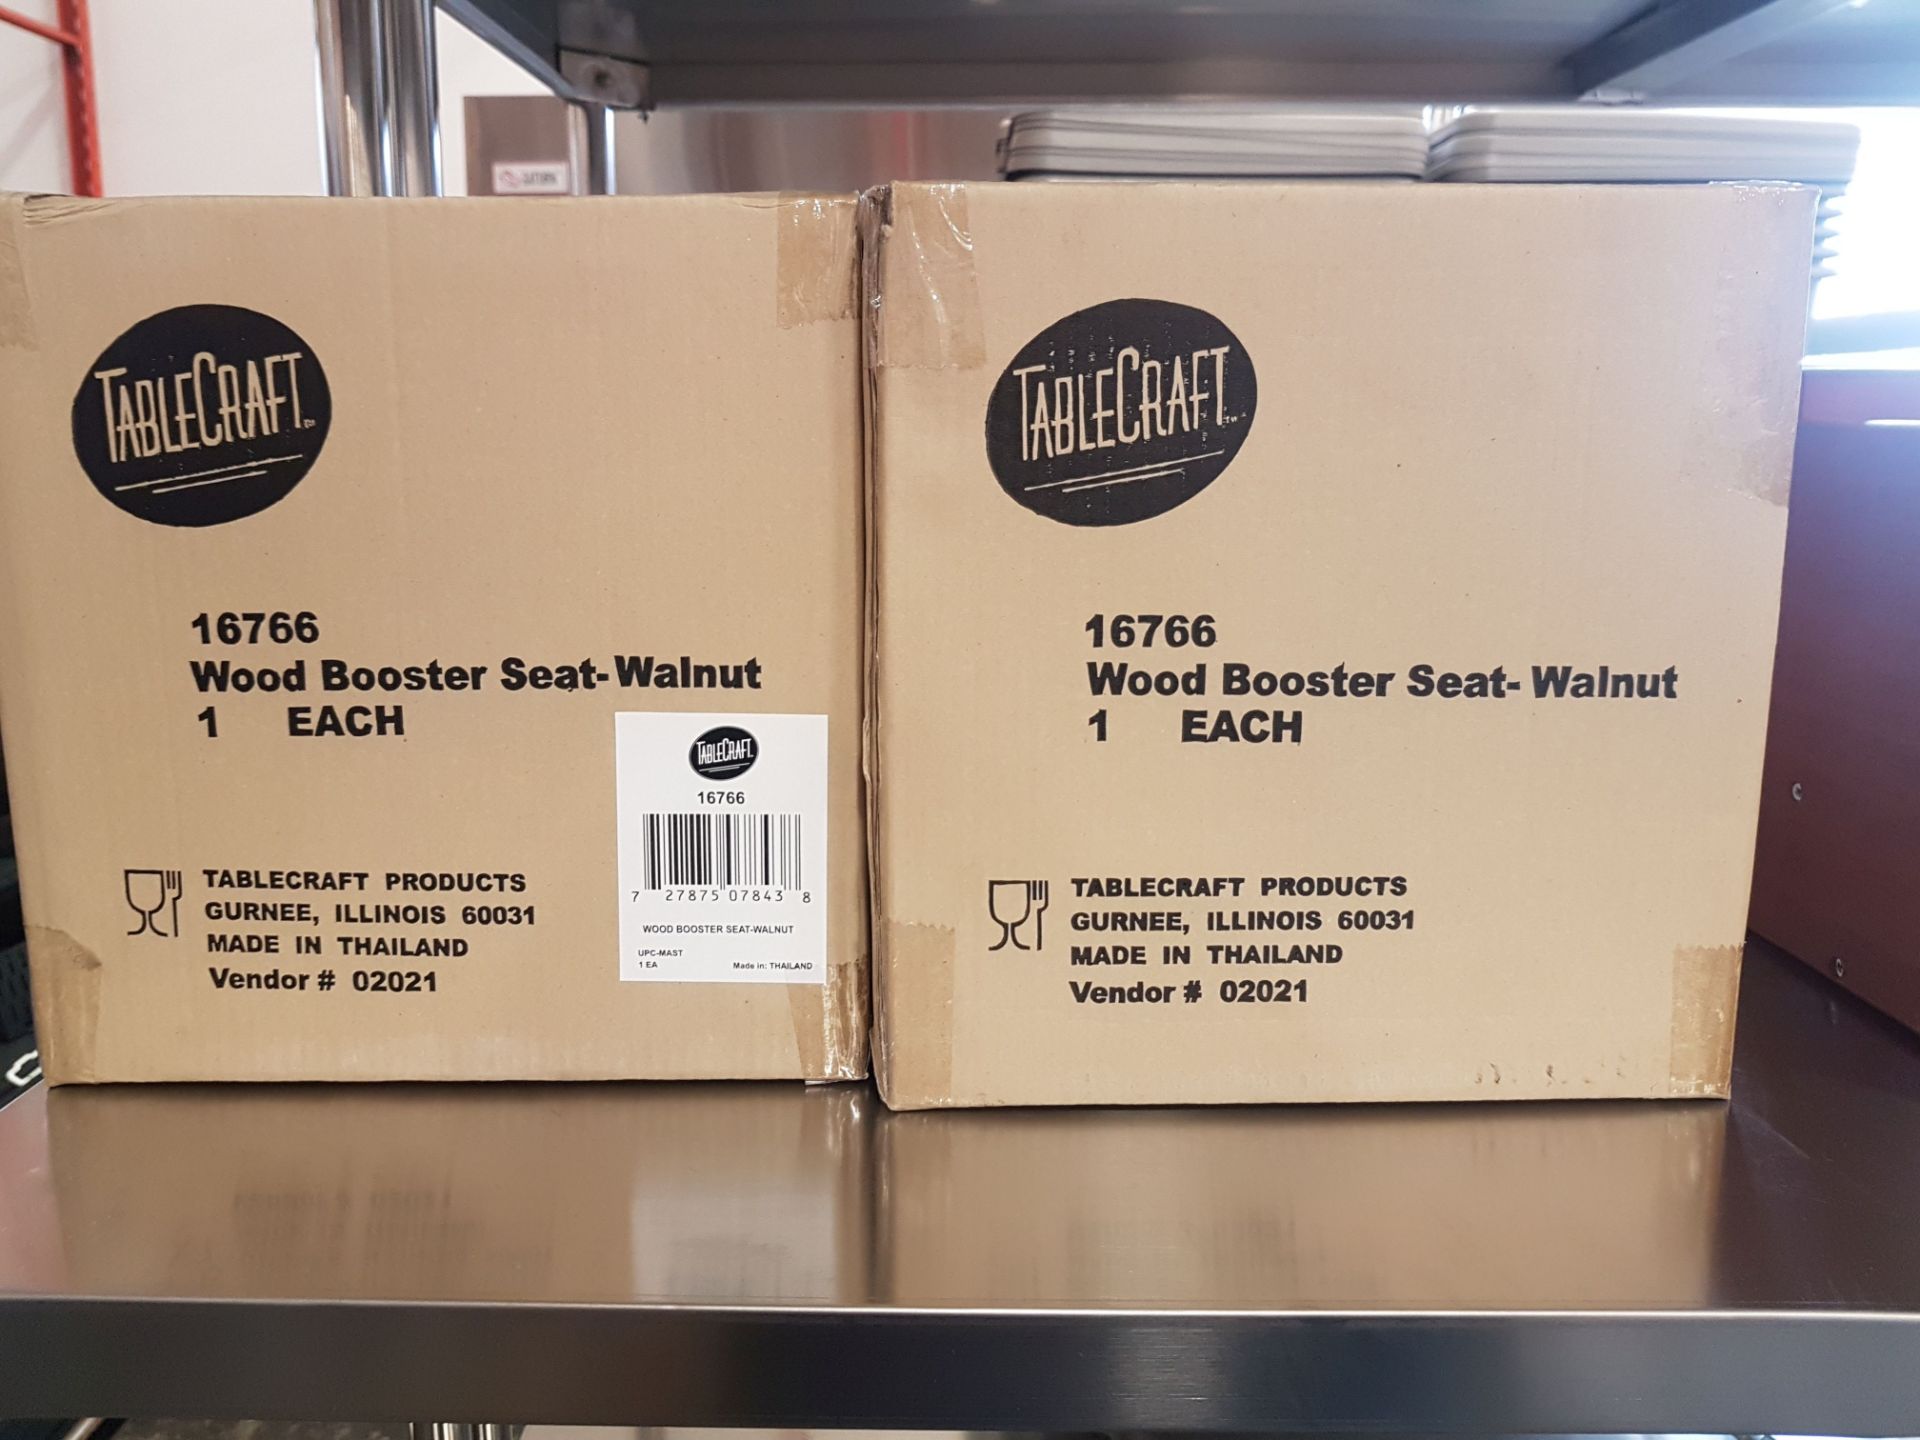 Wood Booster Seats - Walnut - Lot of 3 - Image 3 of 3